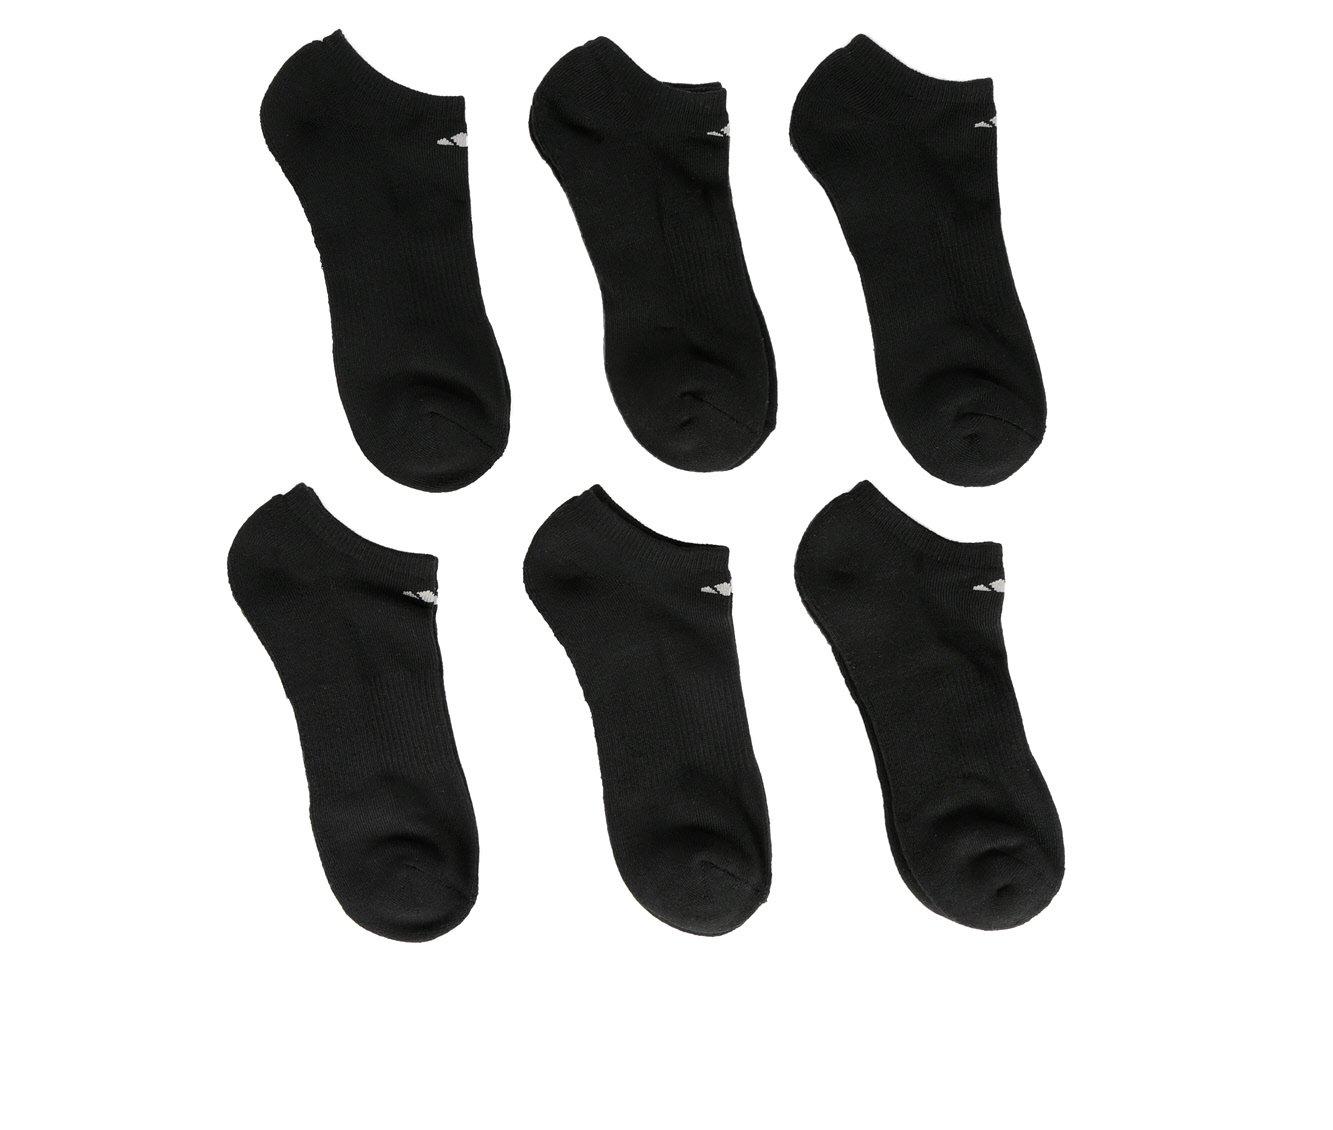  Under Armour Women's Cushioned No Show Socks, 6-Pairs, Black,  Medium : Clothing, Shoes & Jewelry